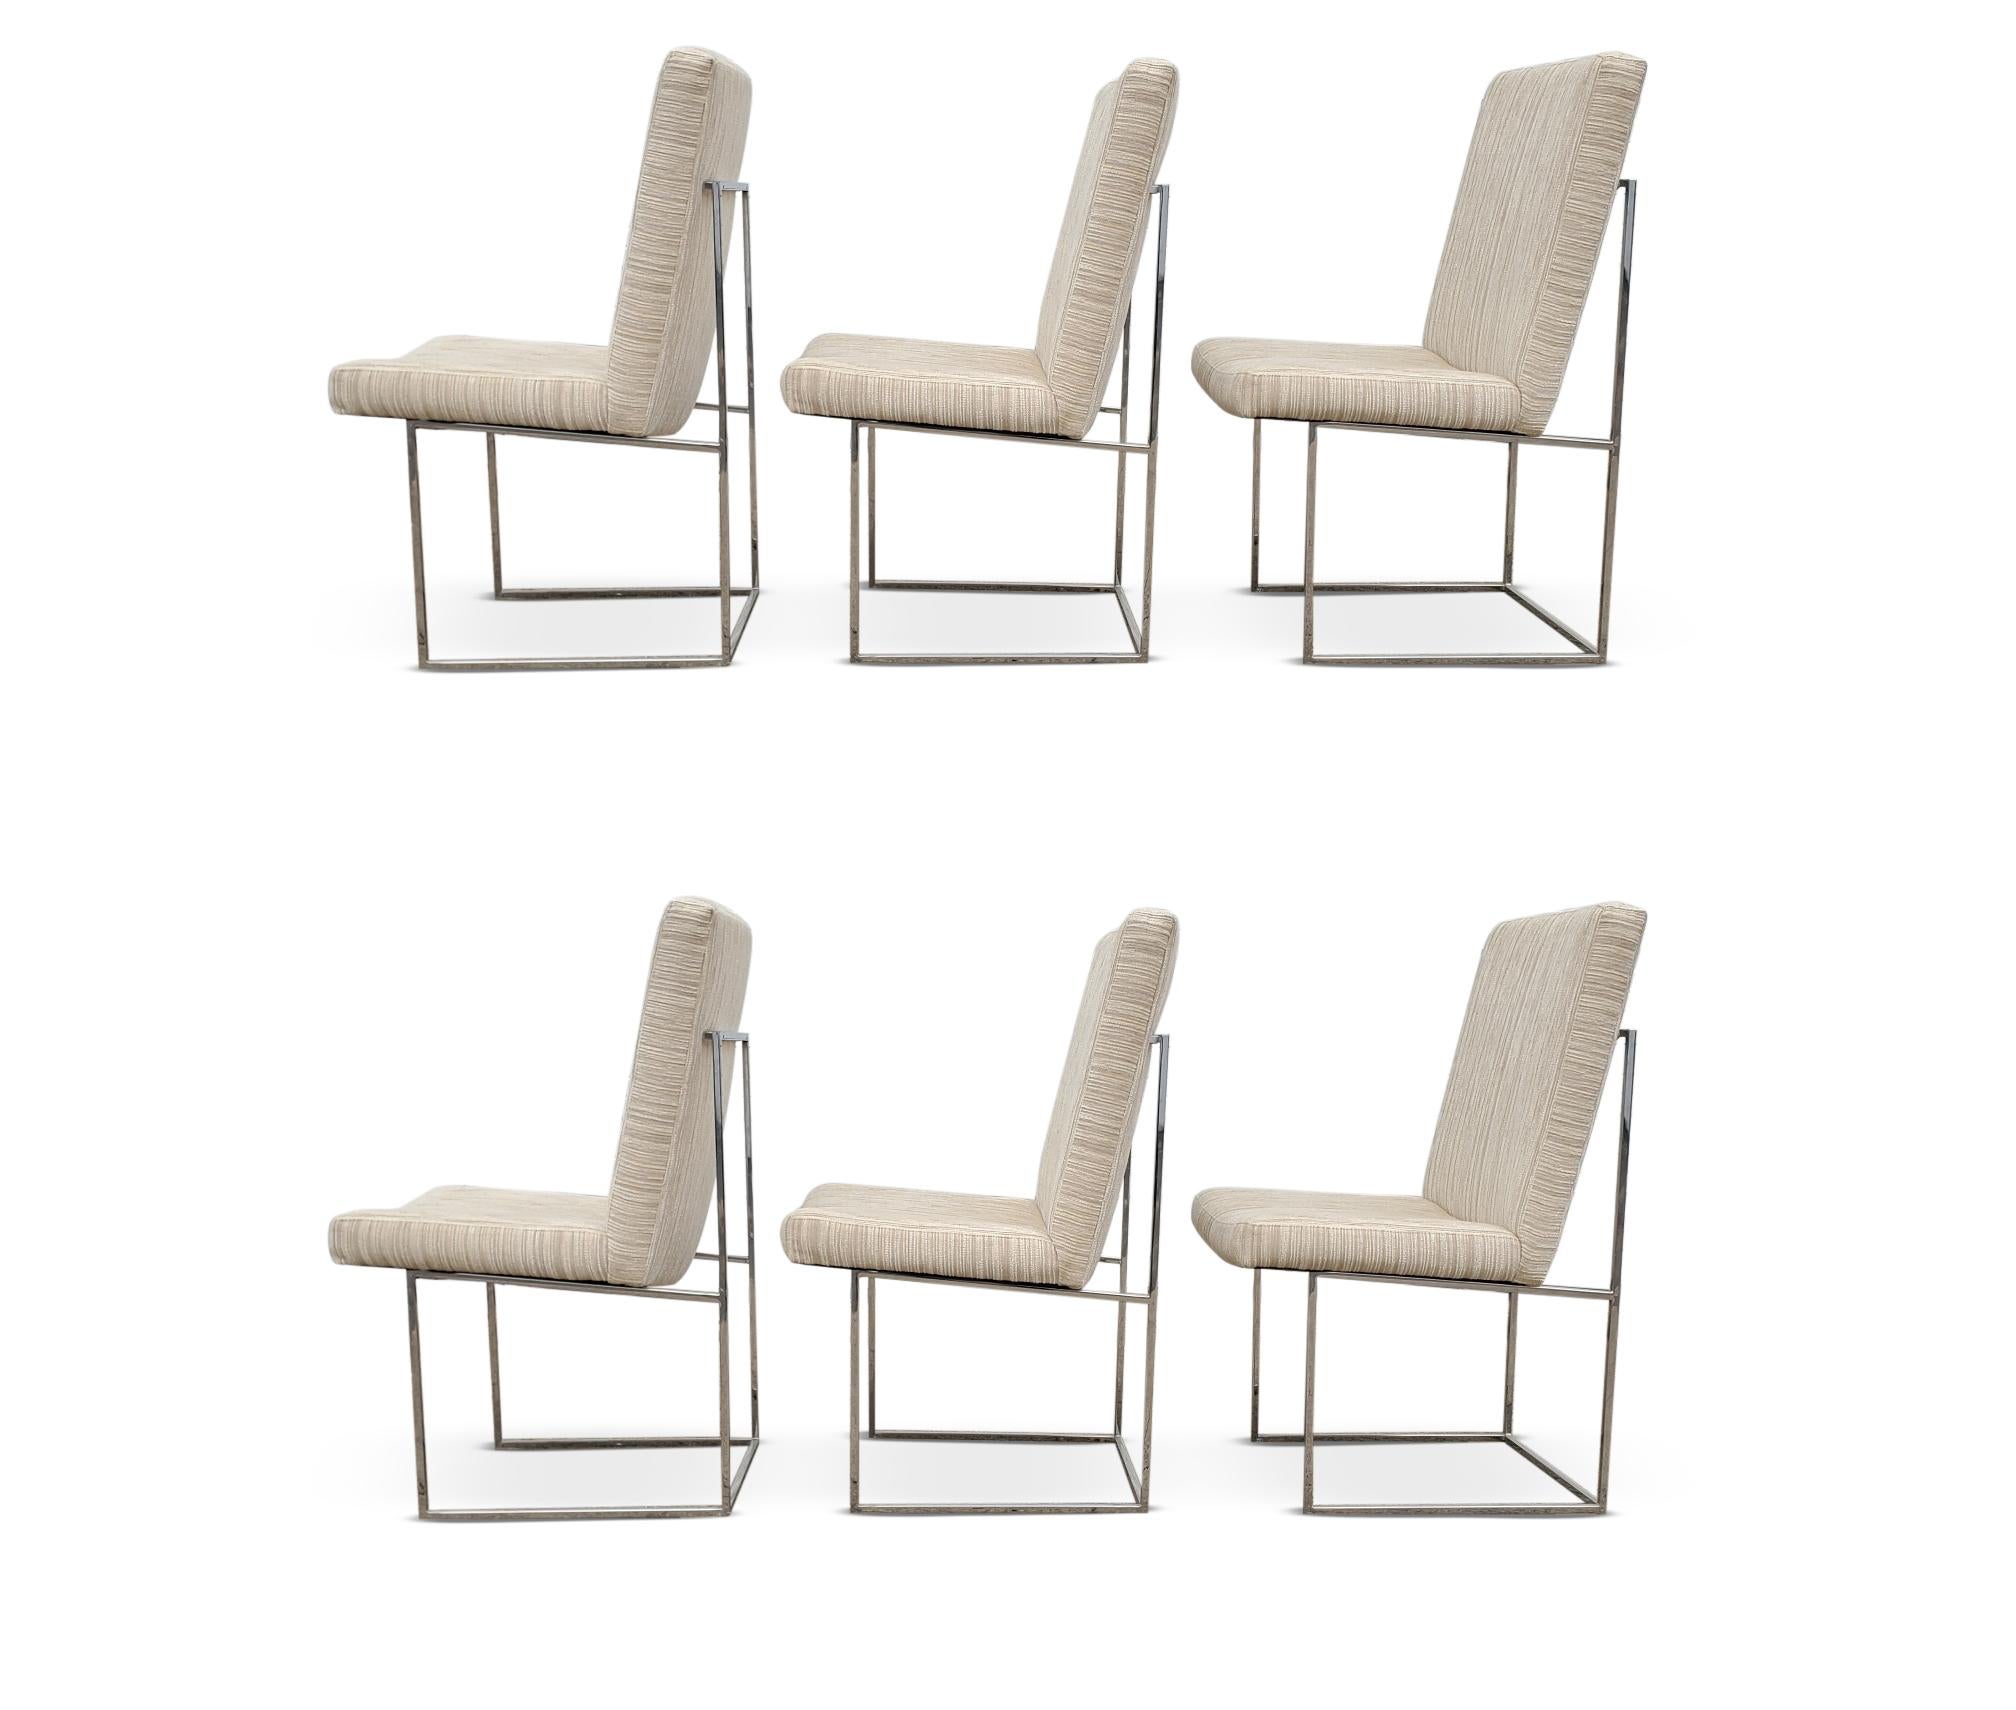 American Milo Baughman for Thayer Coggin ' Thin Line ' Chrome Dining Chairs